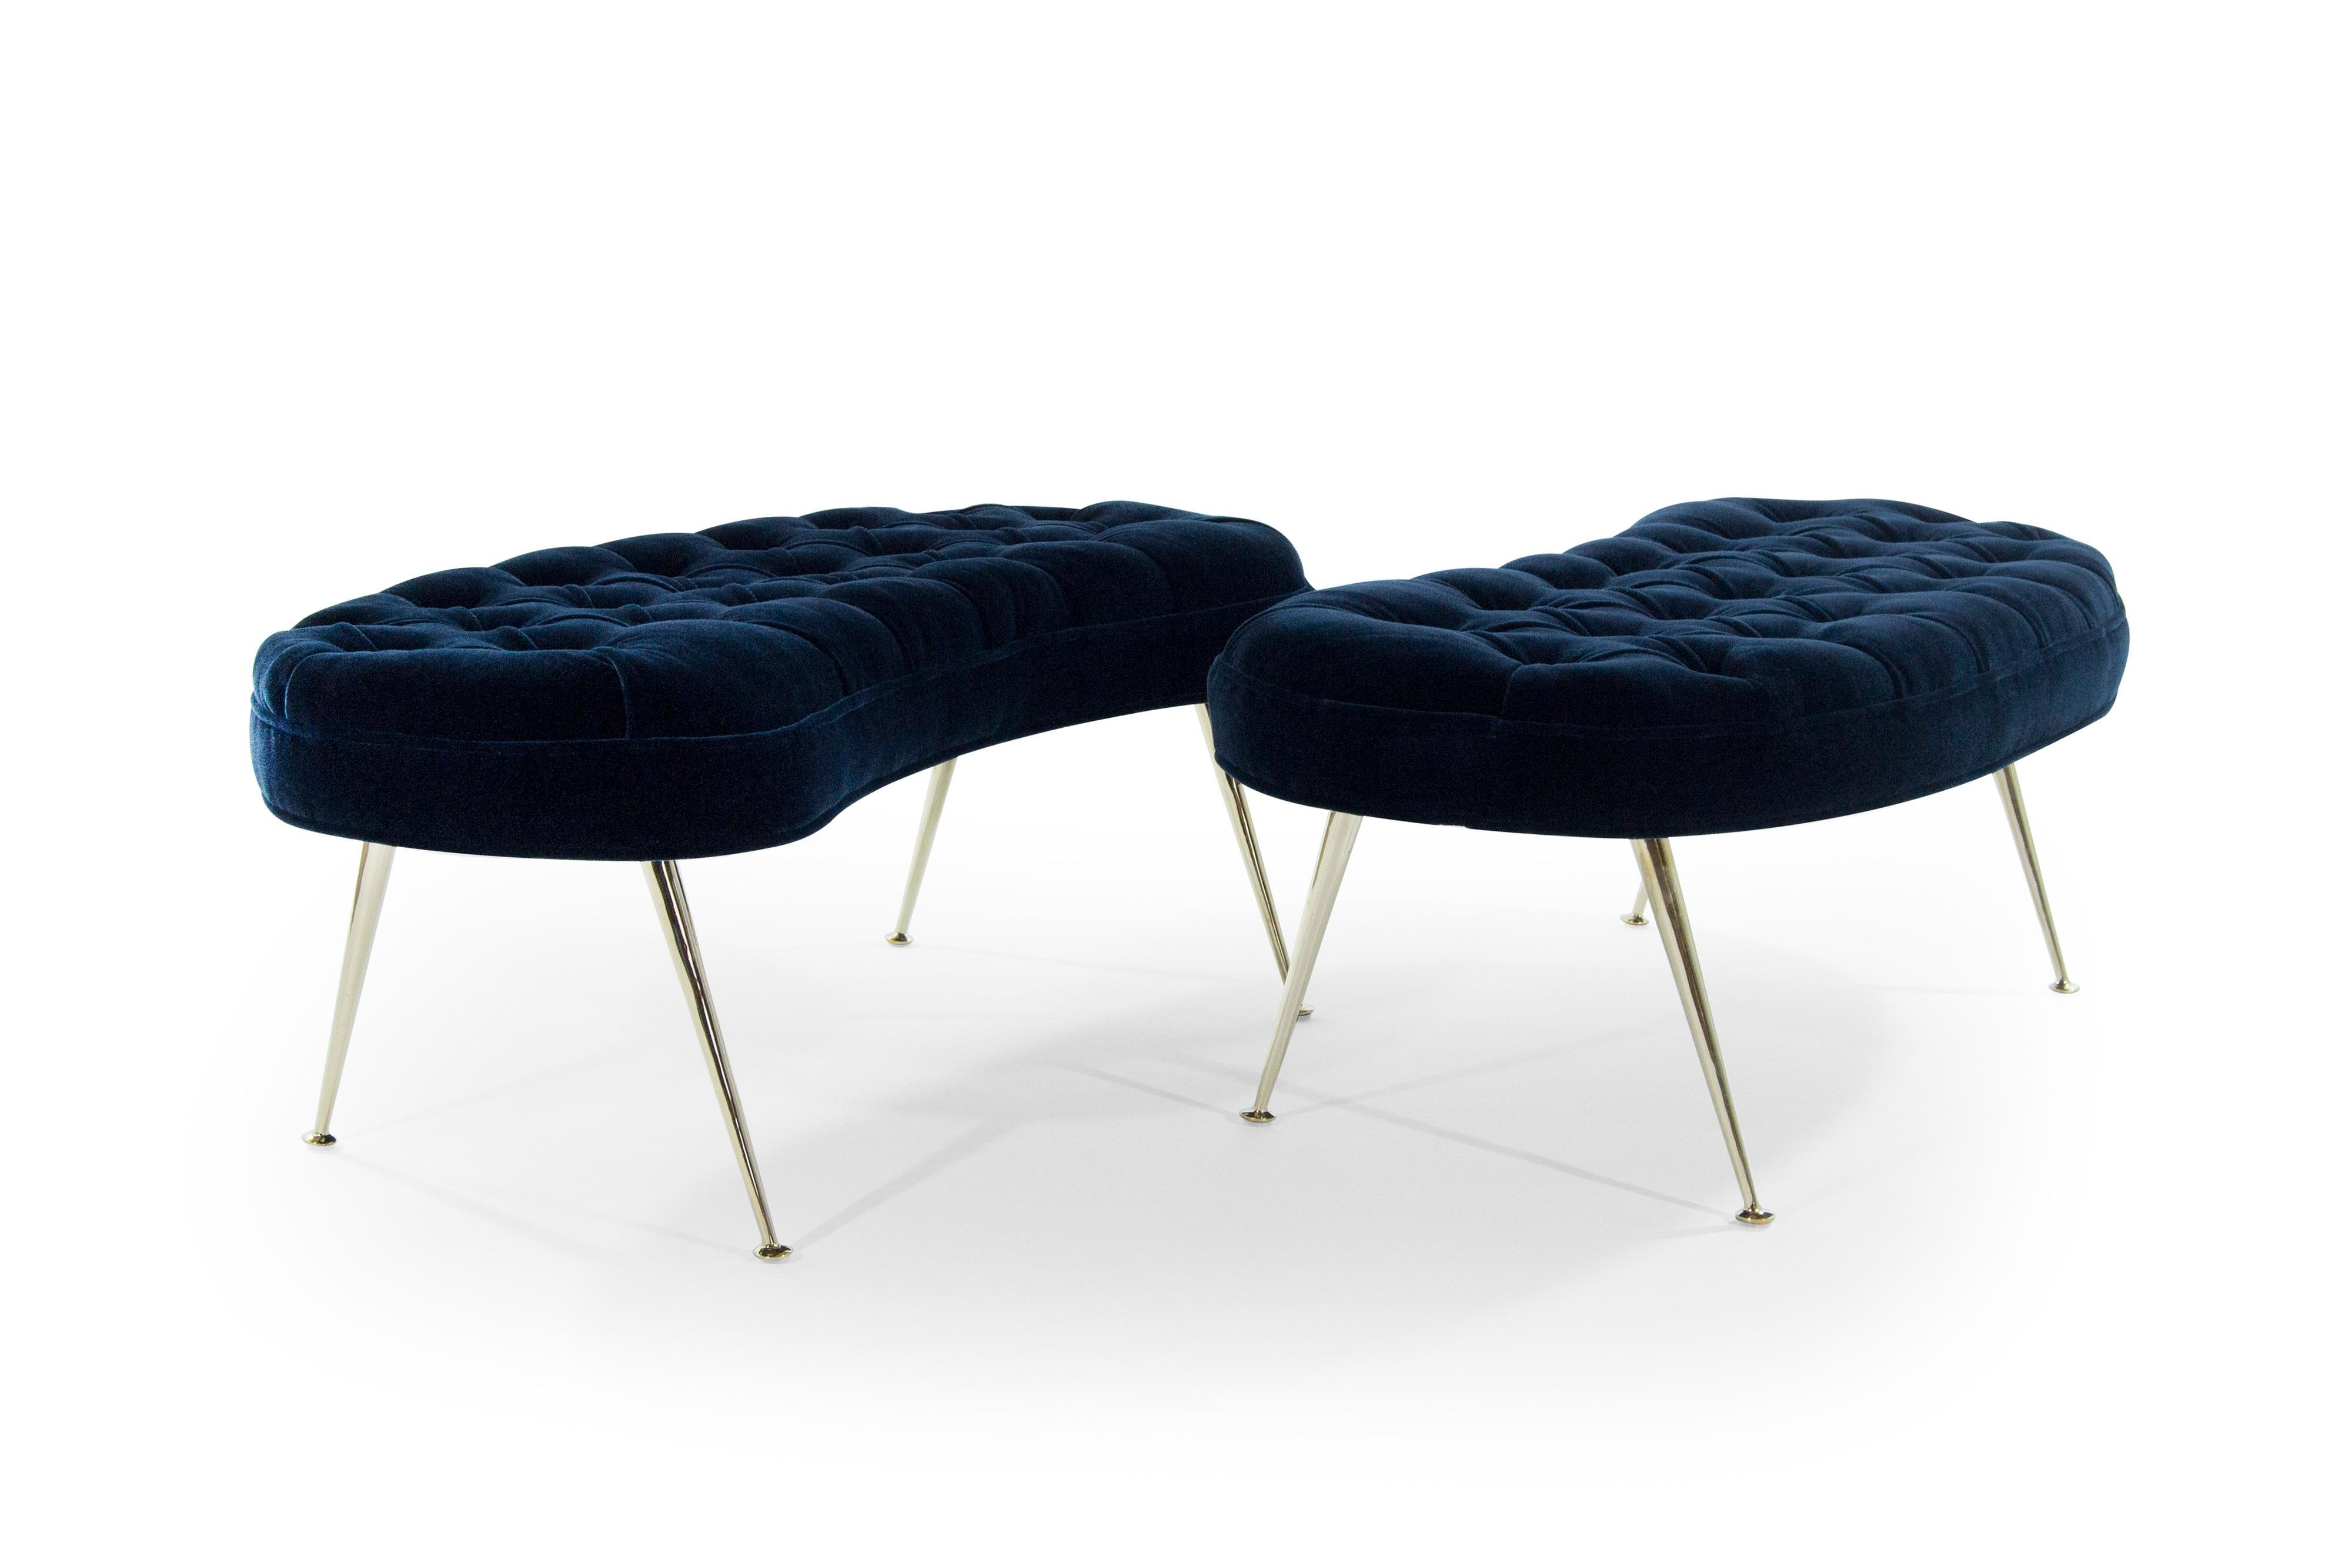 A fantastic pair of kidney shaped benches in tufted design, newly upholstered in midnight blue mohair by Donghia. Brass legs newly polished. Priced individually.